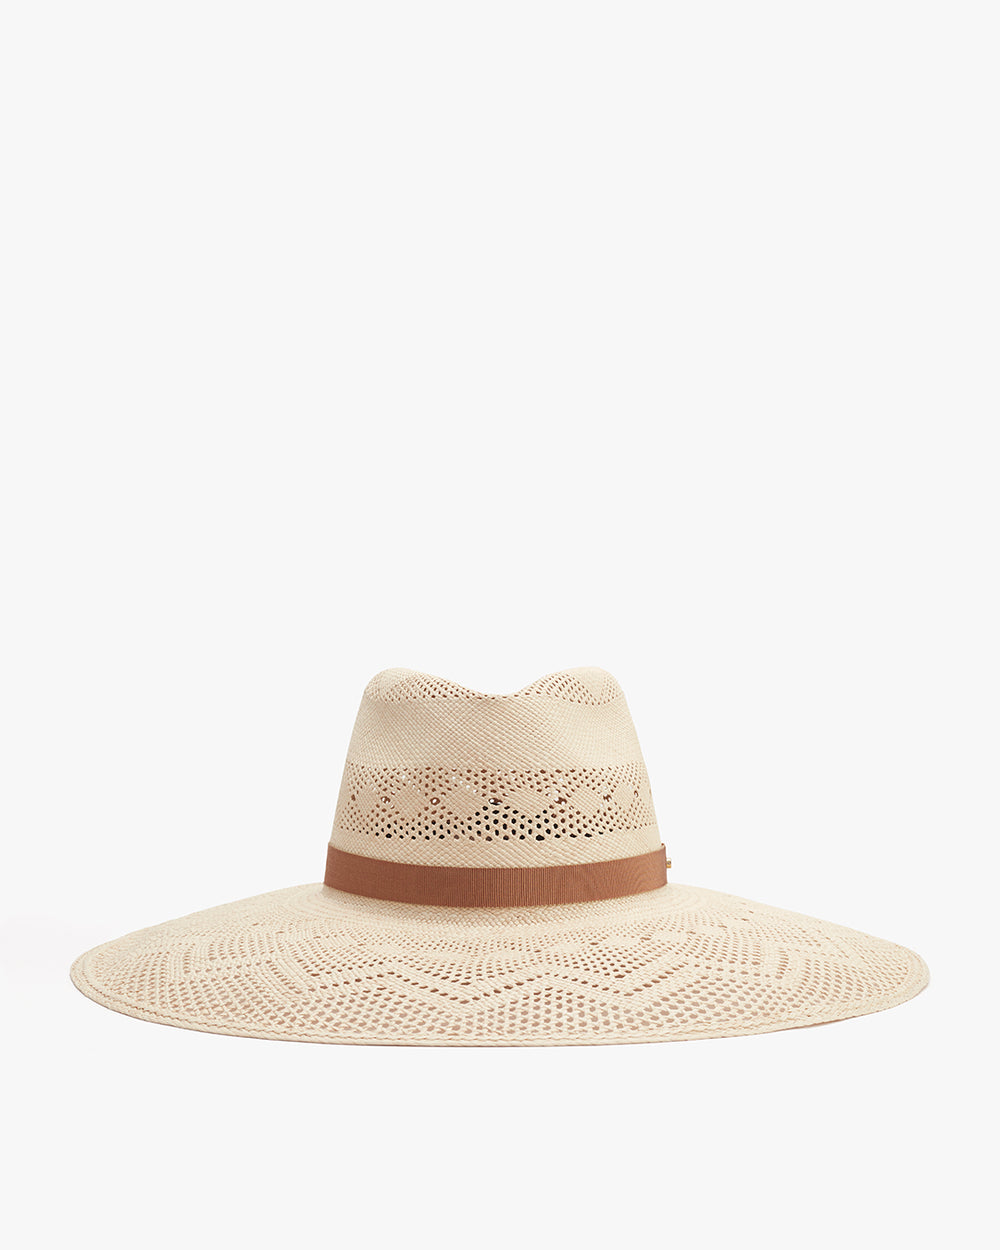 Wide-brimmed hat with perforated pattern and a ribbon band.